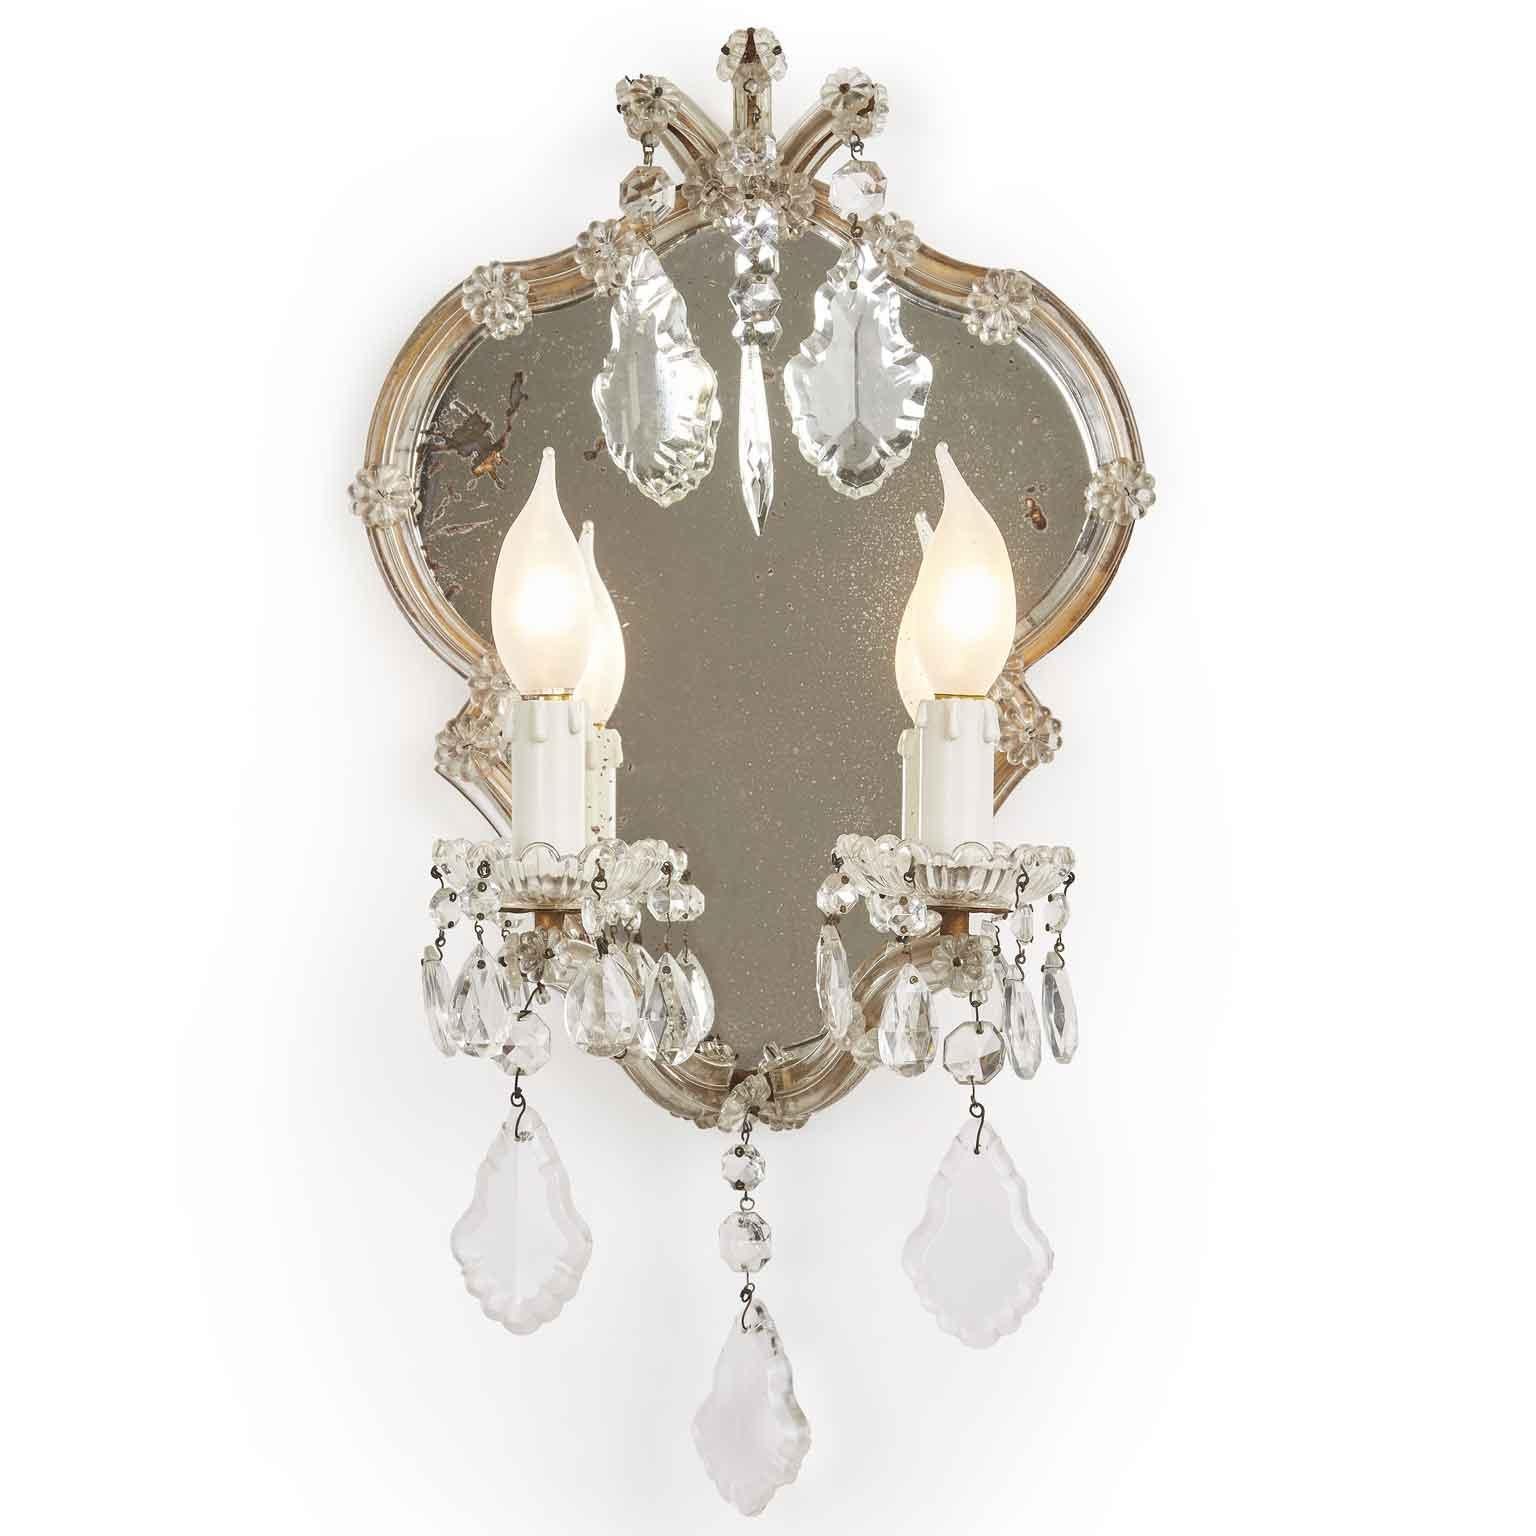 Pair of Hollywood Regency style crystal wall lights, Maria Therese two-light sconces with shaped mercury mirror of Italian origin coming from a private house of Milan.

Two curved arms, fully arranged with cut glass fan shaped pendants, chains and